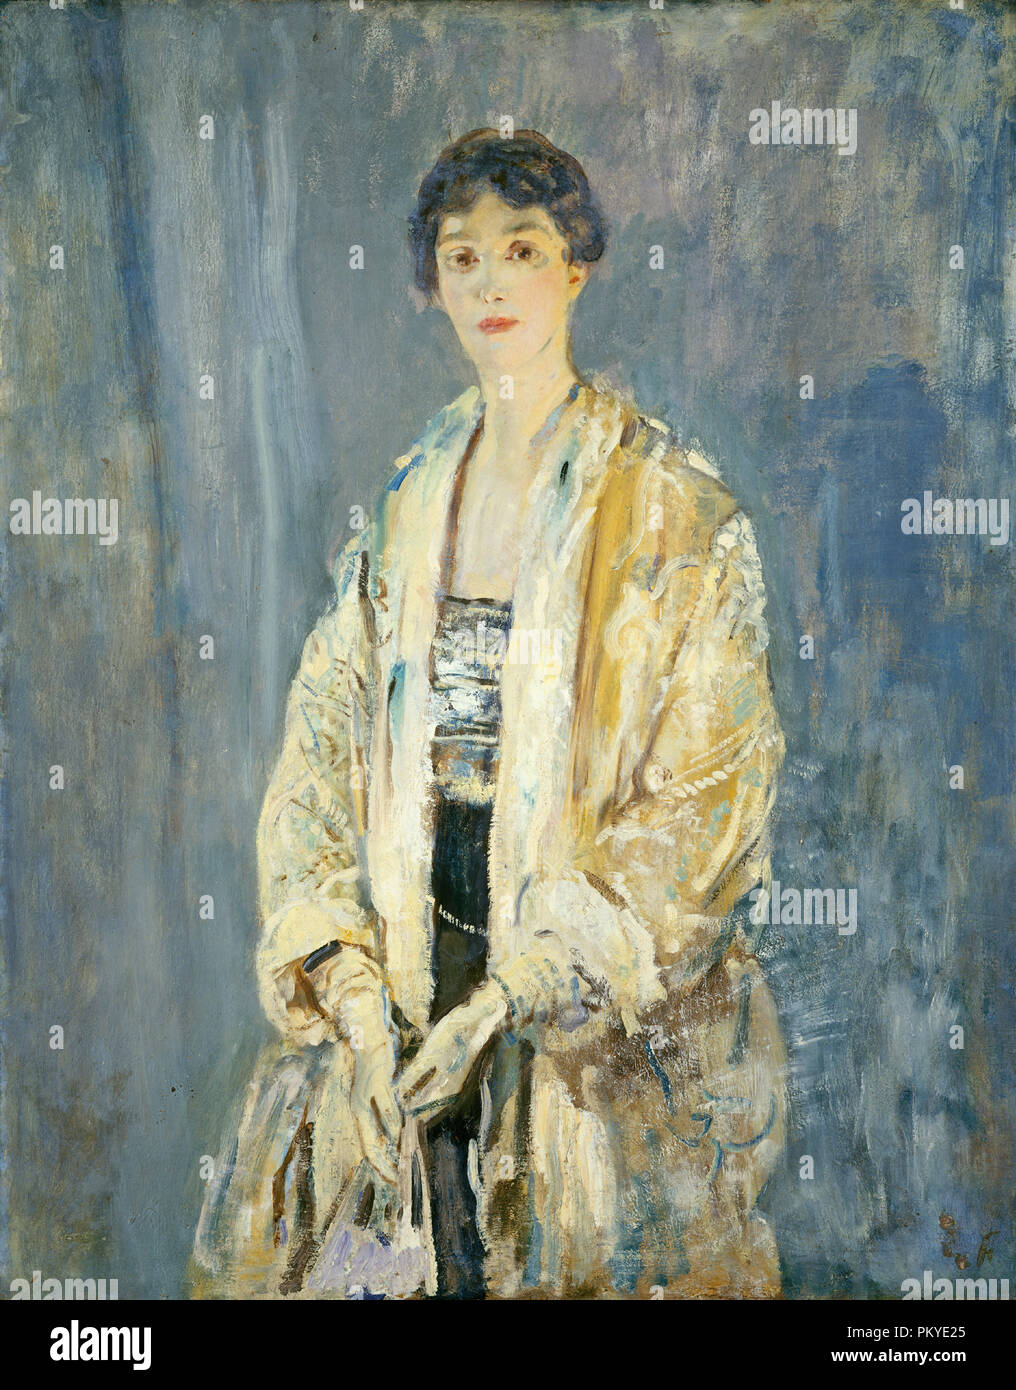 Mrs. Francis Howard. Dated: c. 1916/1918. Dimensions: overall: 127 x 101.5 cm (50 x 39 15/16 in.)  framed: 143.2 x 117.5 x 4.4 cm (56 3/8 x 46 1/4 x 1 3/4 in.). Medium: oil on canvas. Museum: National Gallery of Art, Washington DC. Author: Ambrose McEvoy. Stock Photo